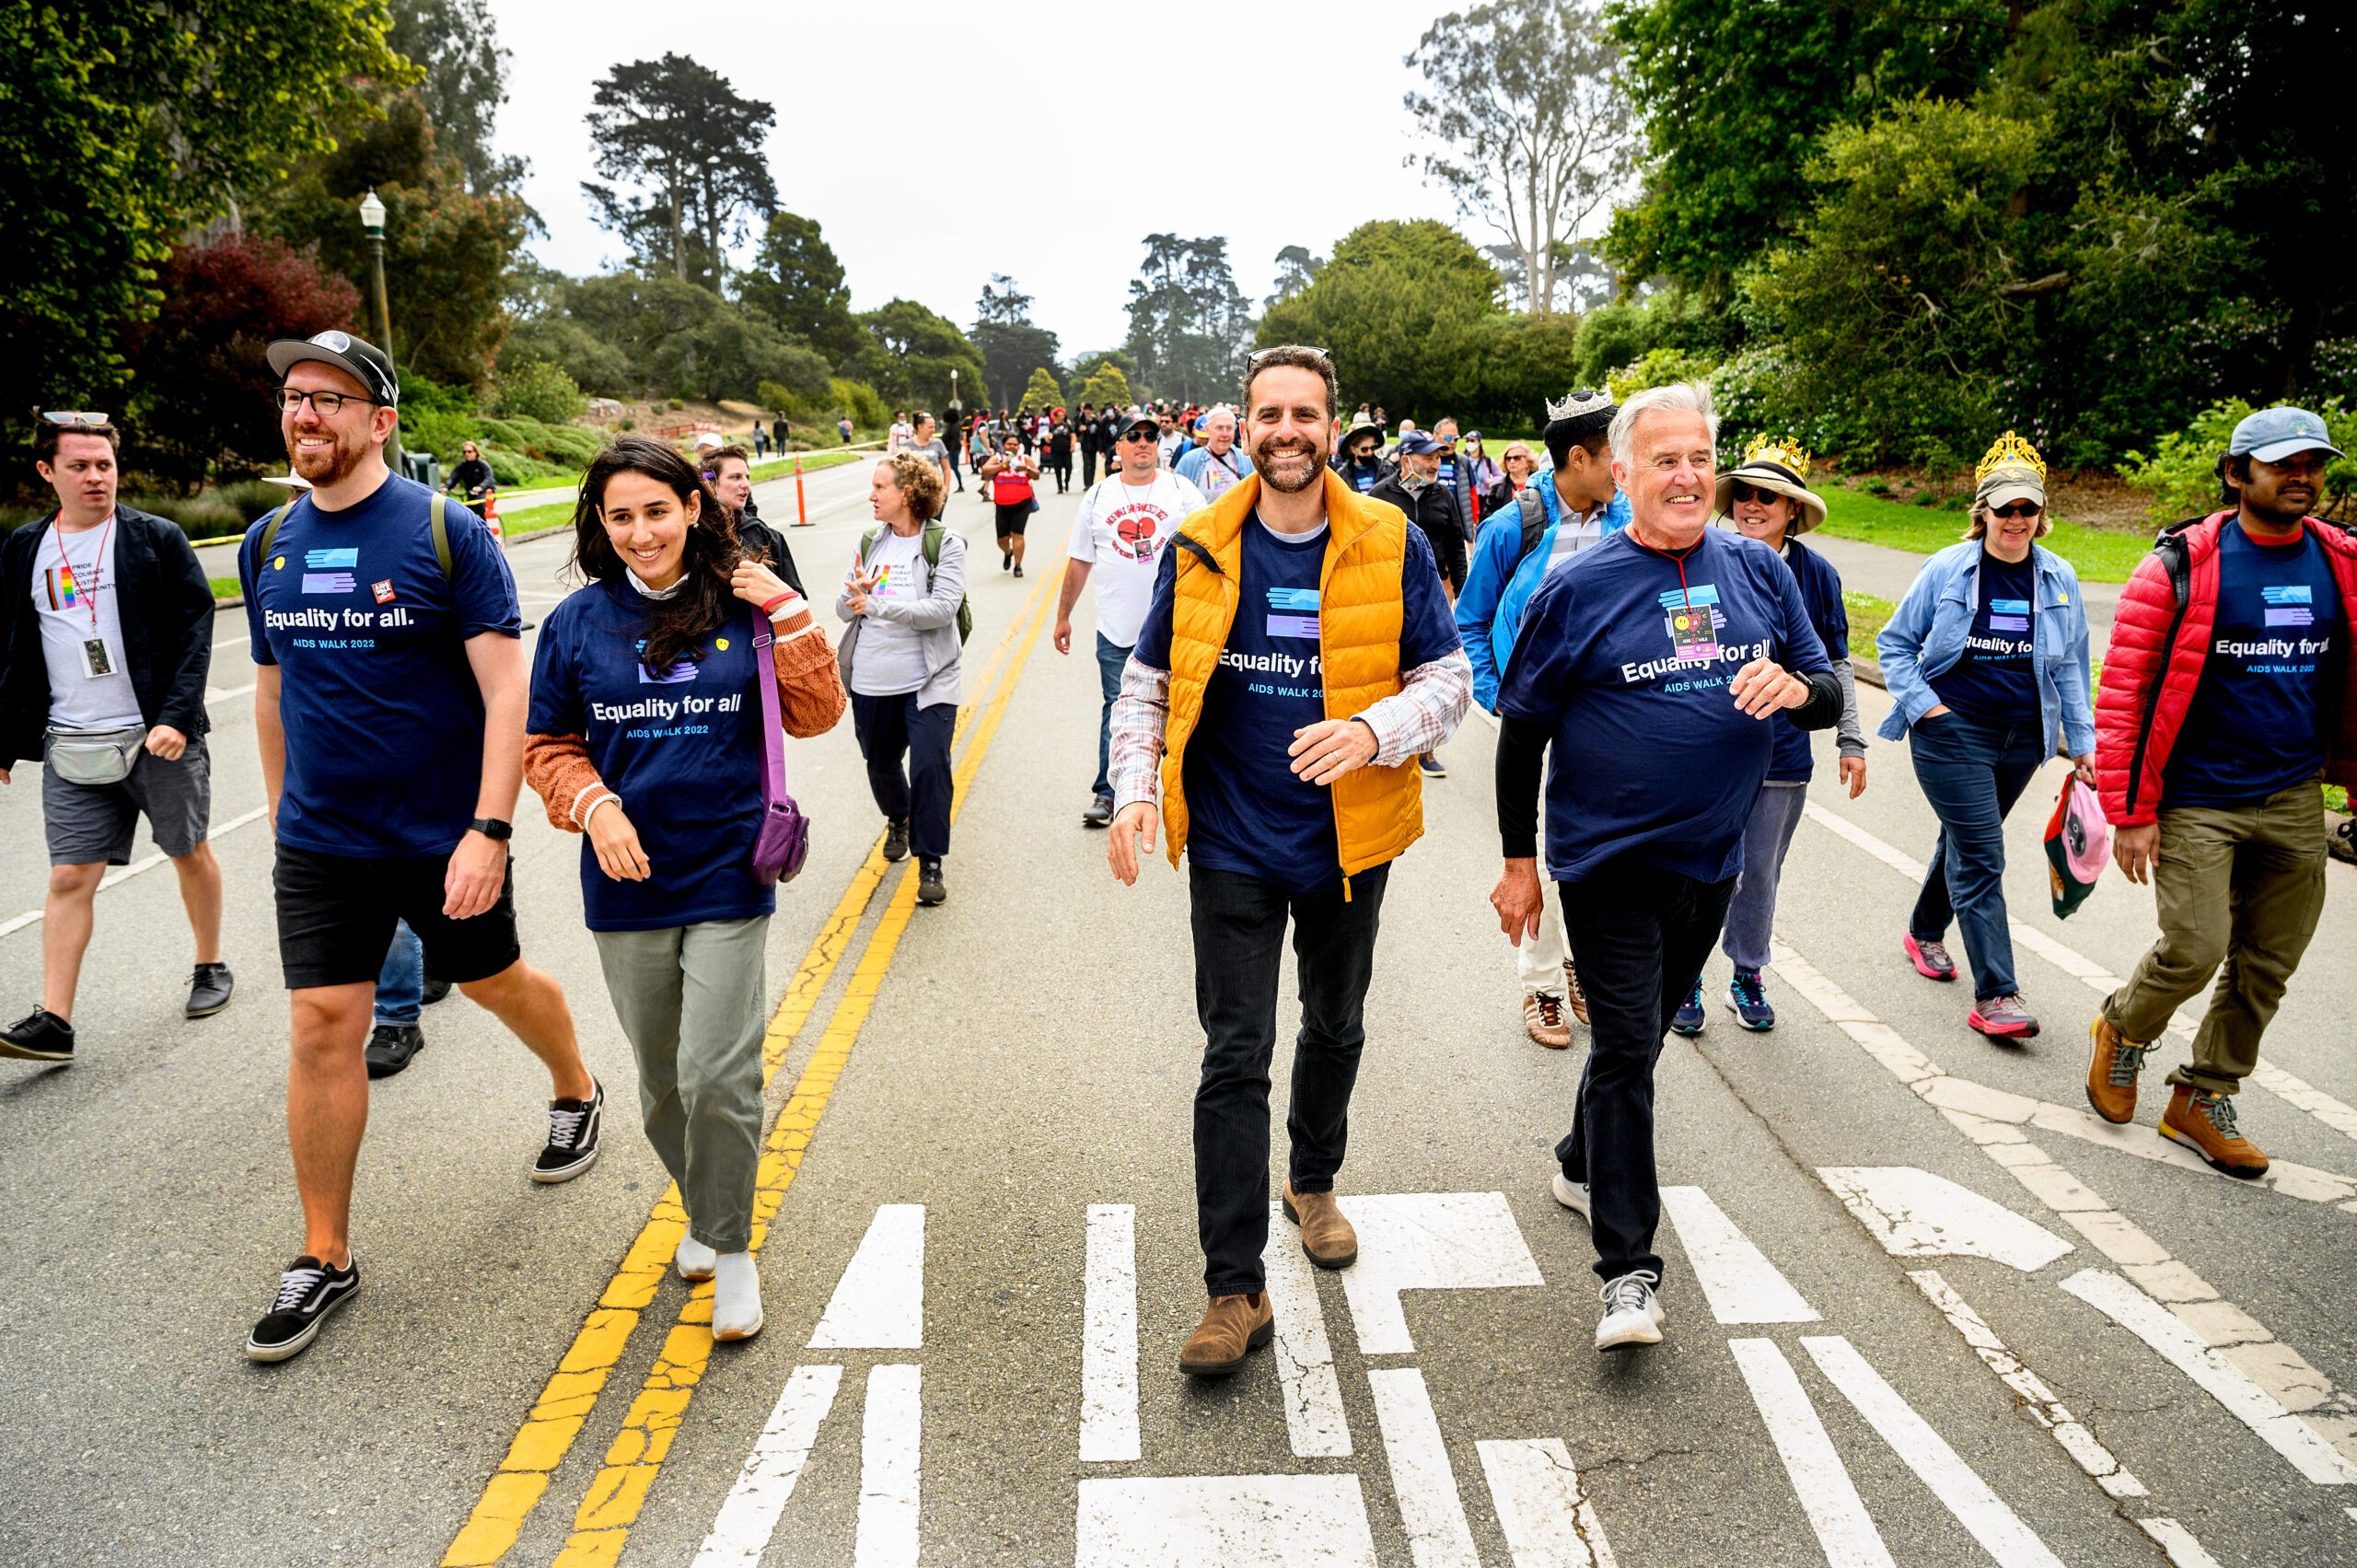 UCSF Global Health Sciences staffers take part in AIDS Walk on Sunday, July 17, 2022, in San Francisco. From right to left are IGHS communications coordinator Robert Mansfield, IGSH director of strategy Jeremy Alberga, Sima Maderi, and curriculum planner Graham Hinchcliffe.